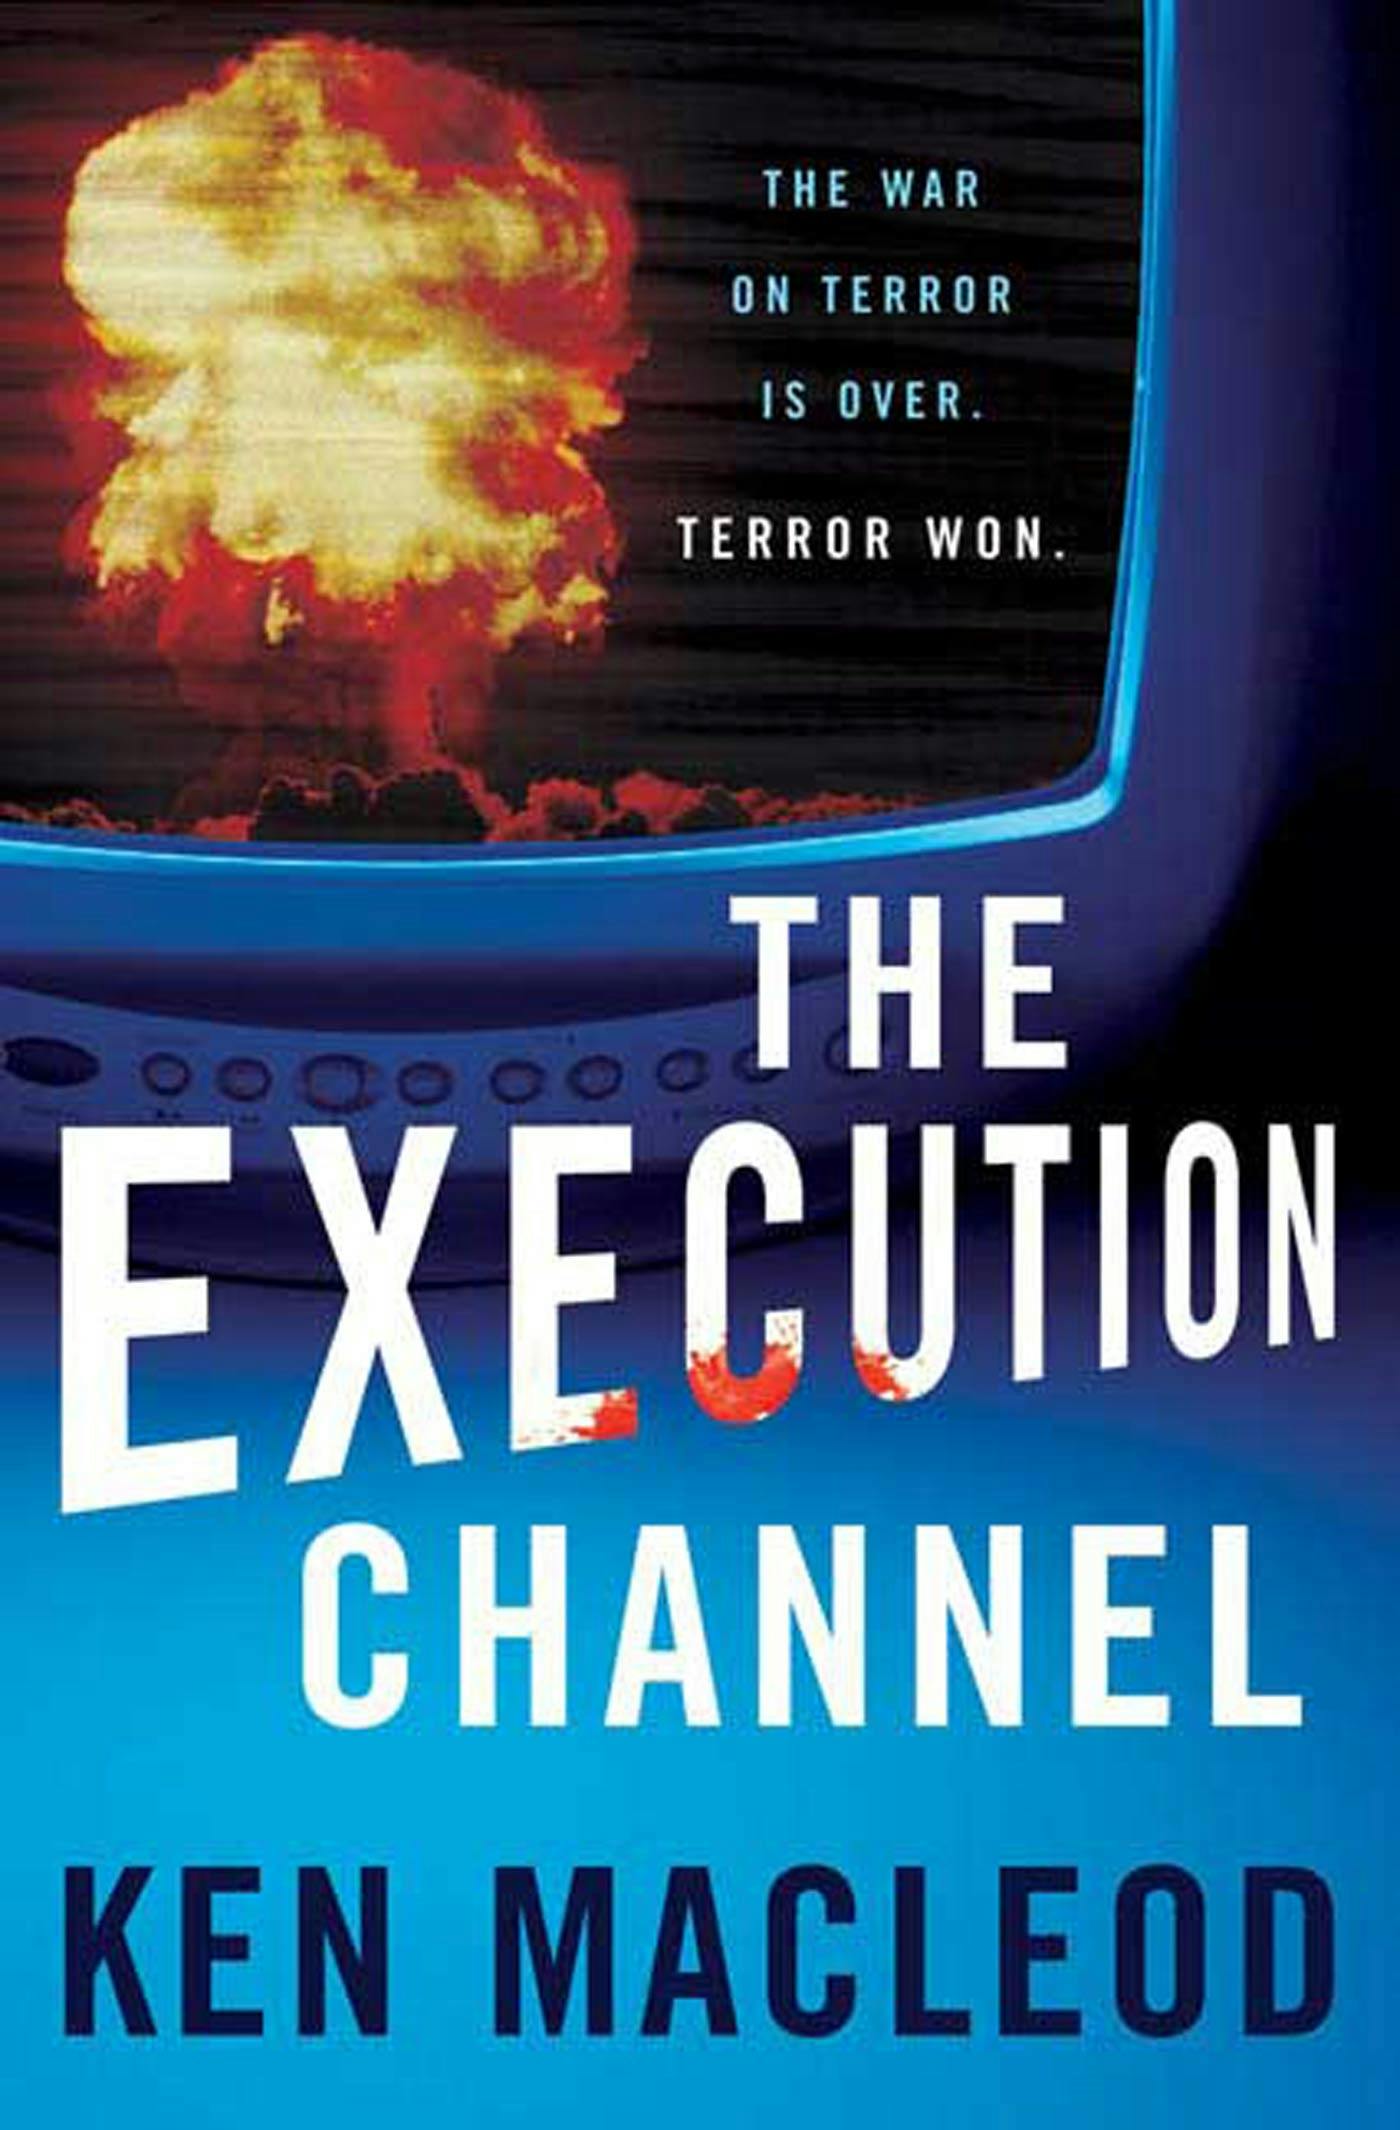 Cover for the book titled as: The Execution Channel